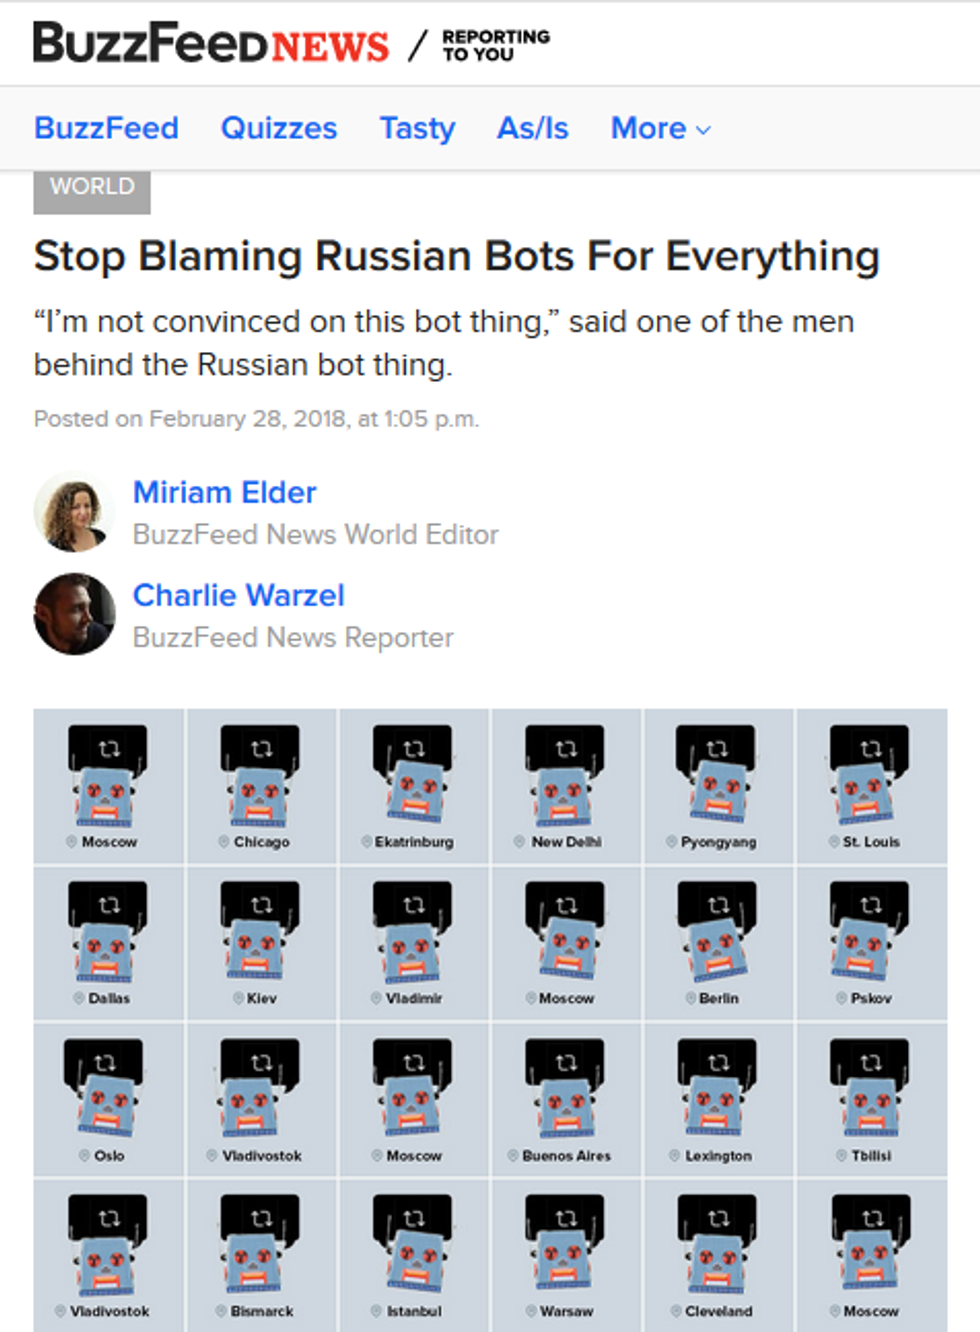 BuzzFeed: Stop Blaming Russian Bots For Everything